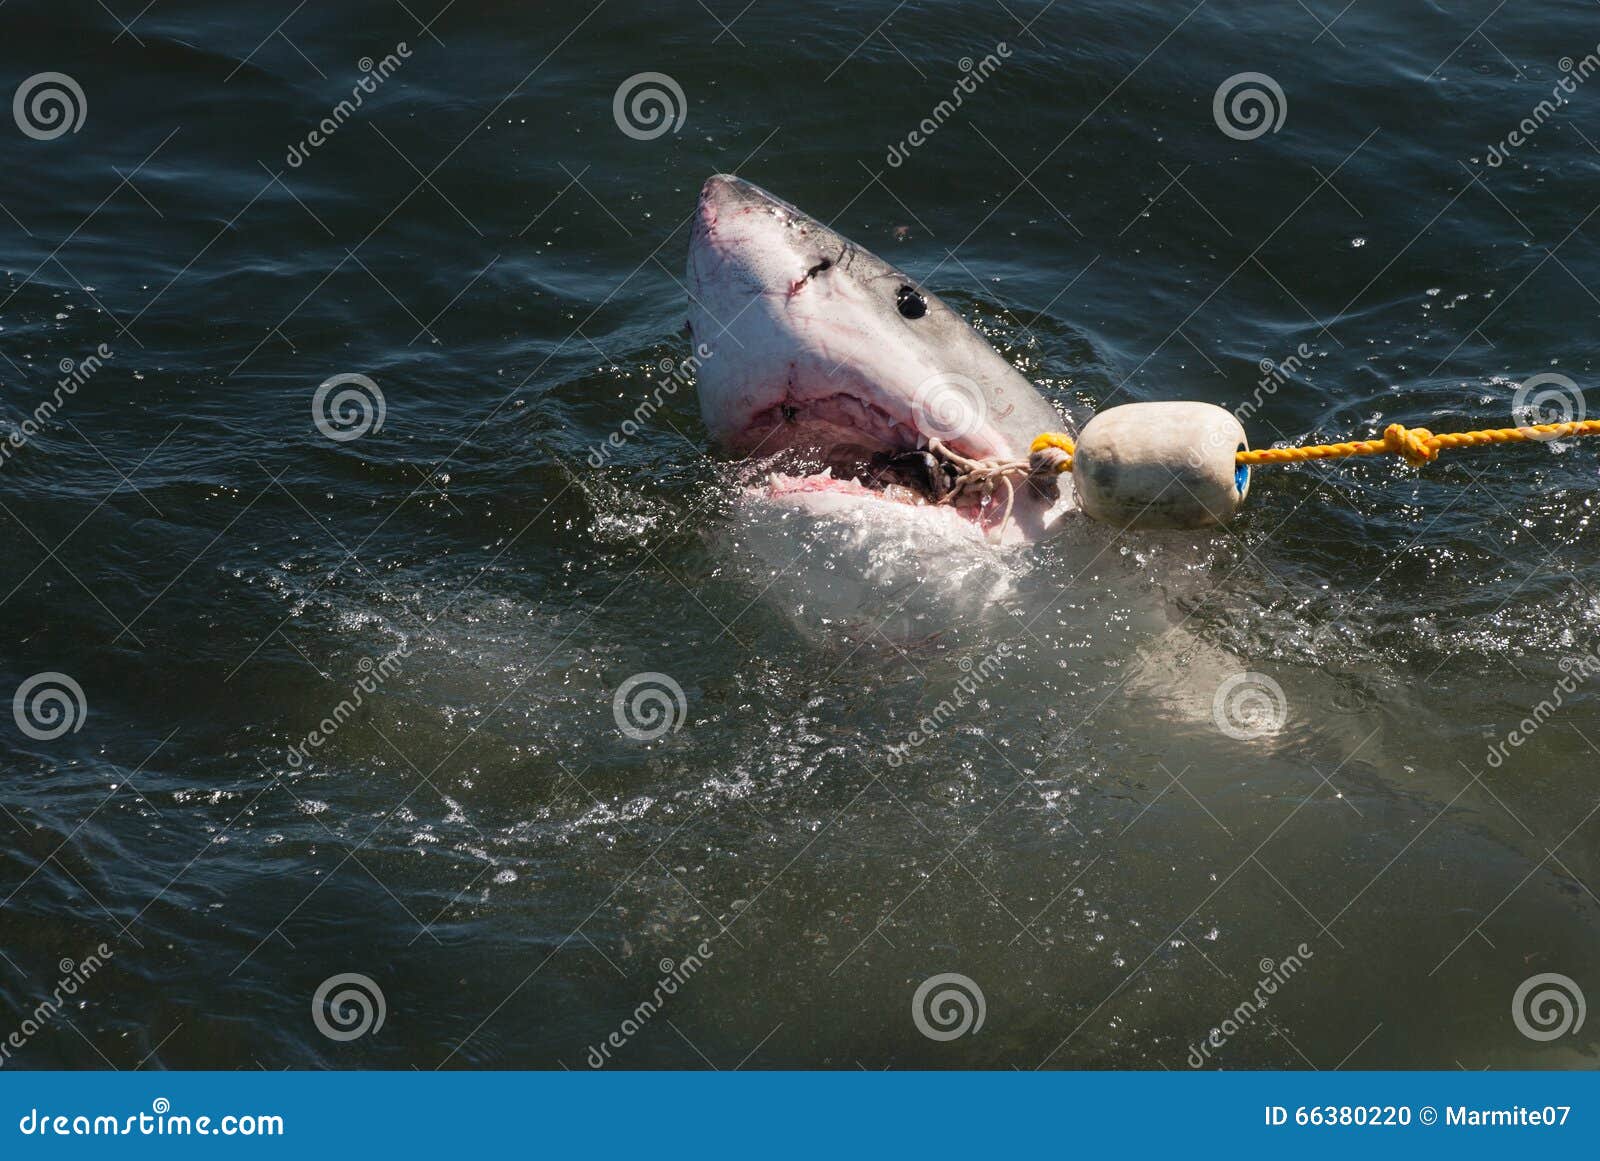 A Great White Shark with a Bait Rope in Its Mouth Stock Photo